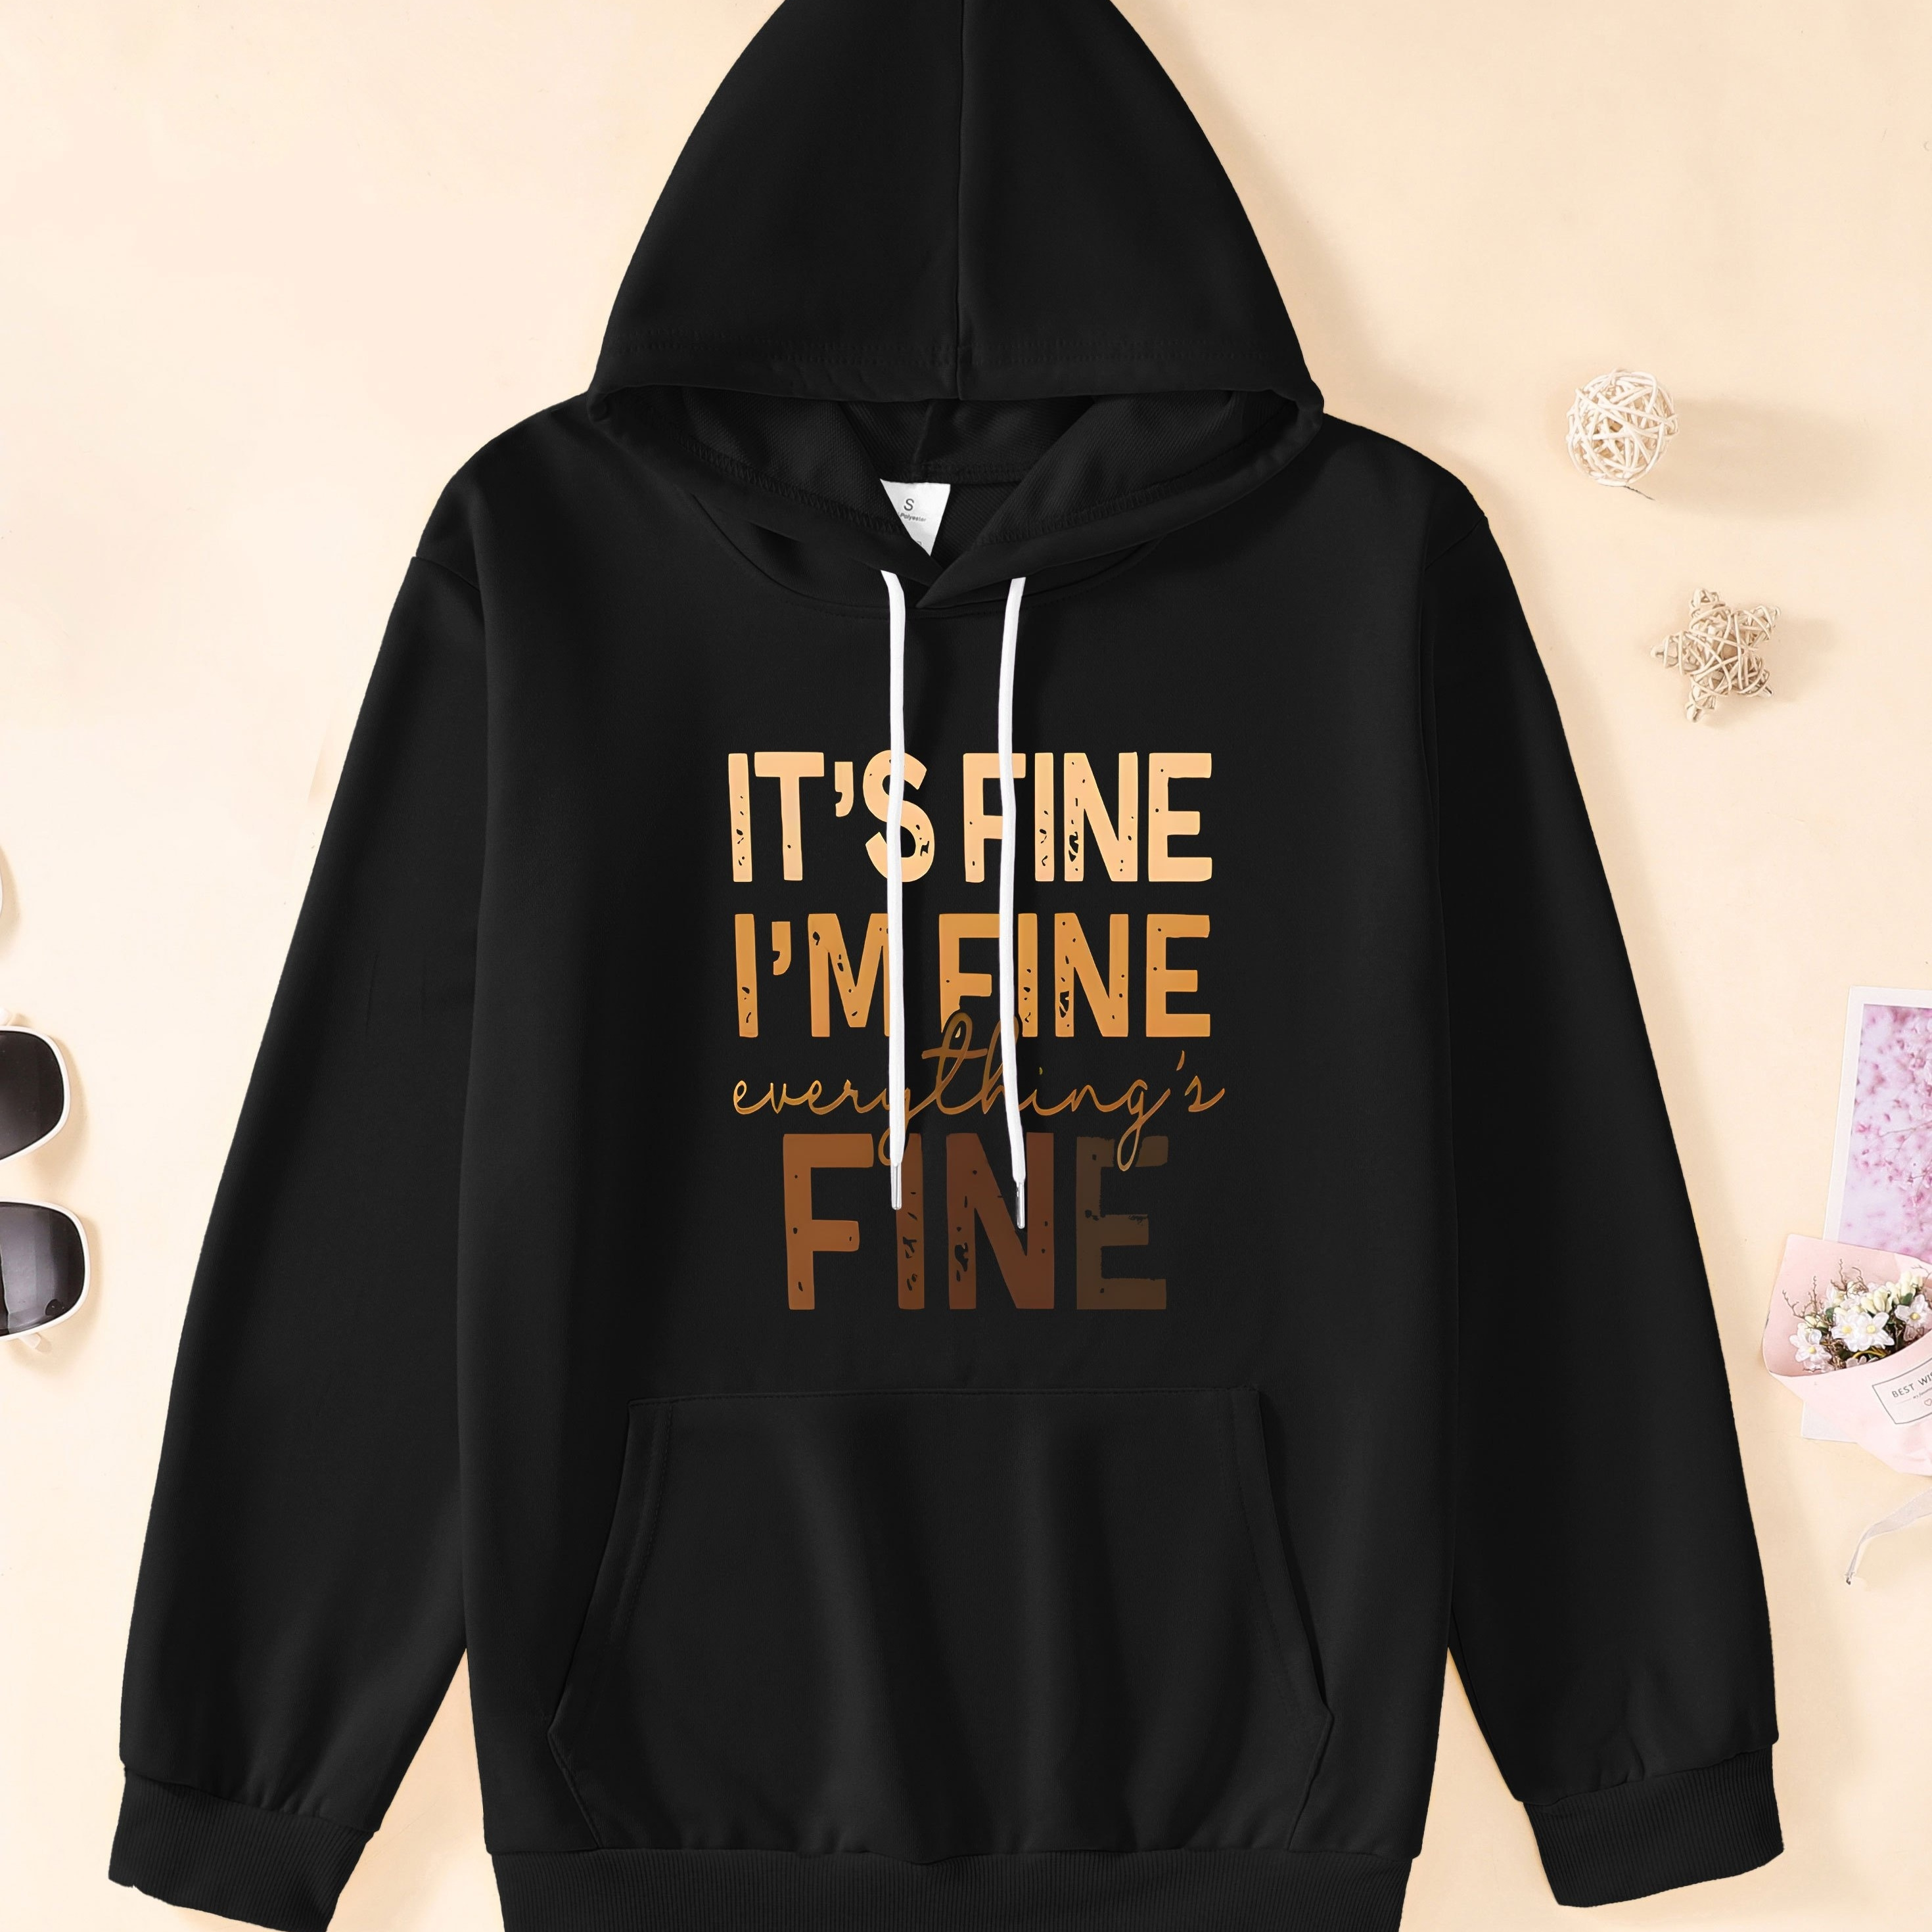 

It's Fine I'm Fine Everything's Fine Print Hoodie, Men's Casual And Creative Design Hooded Pullover, Long Sleeve Sweatshirt For Men With Kangaroo Pocket For Fall And Winter, As Gifts